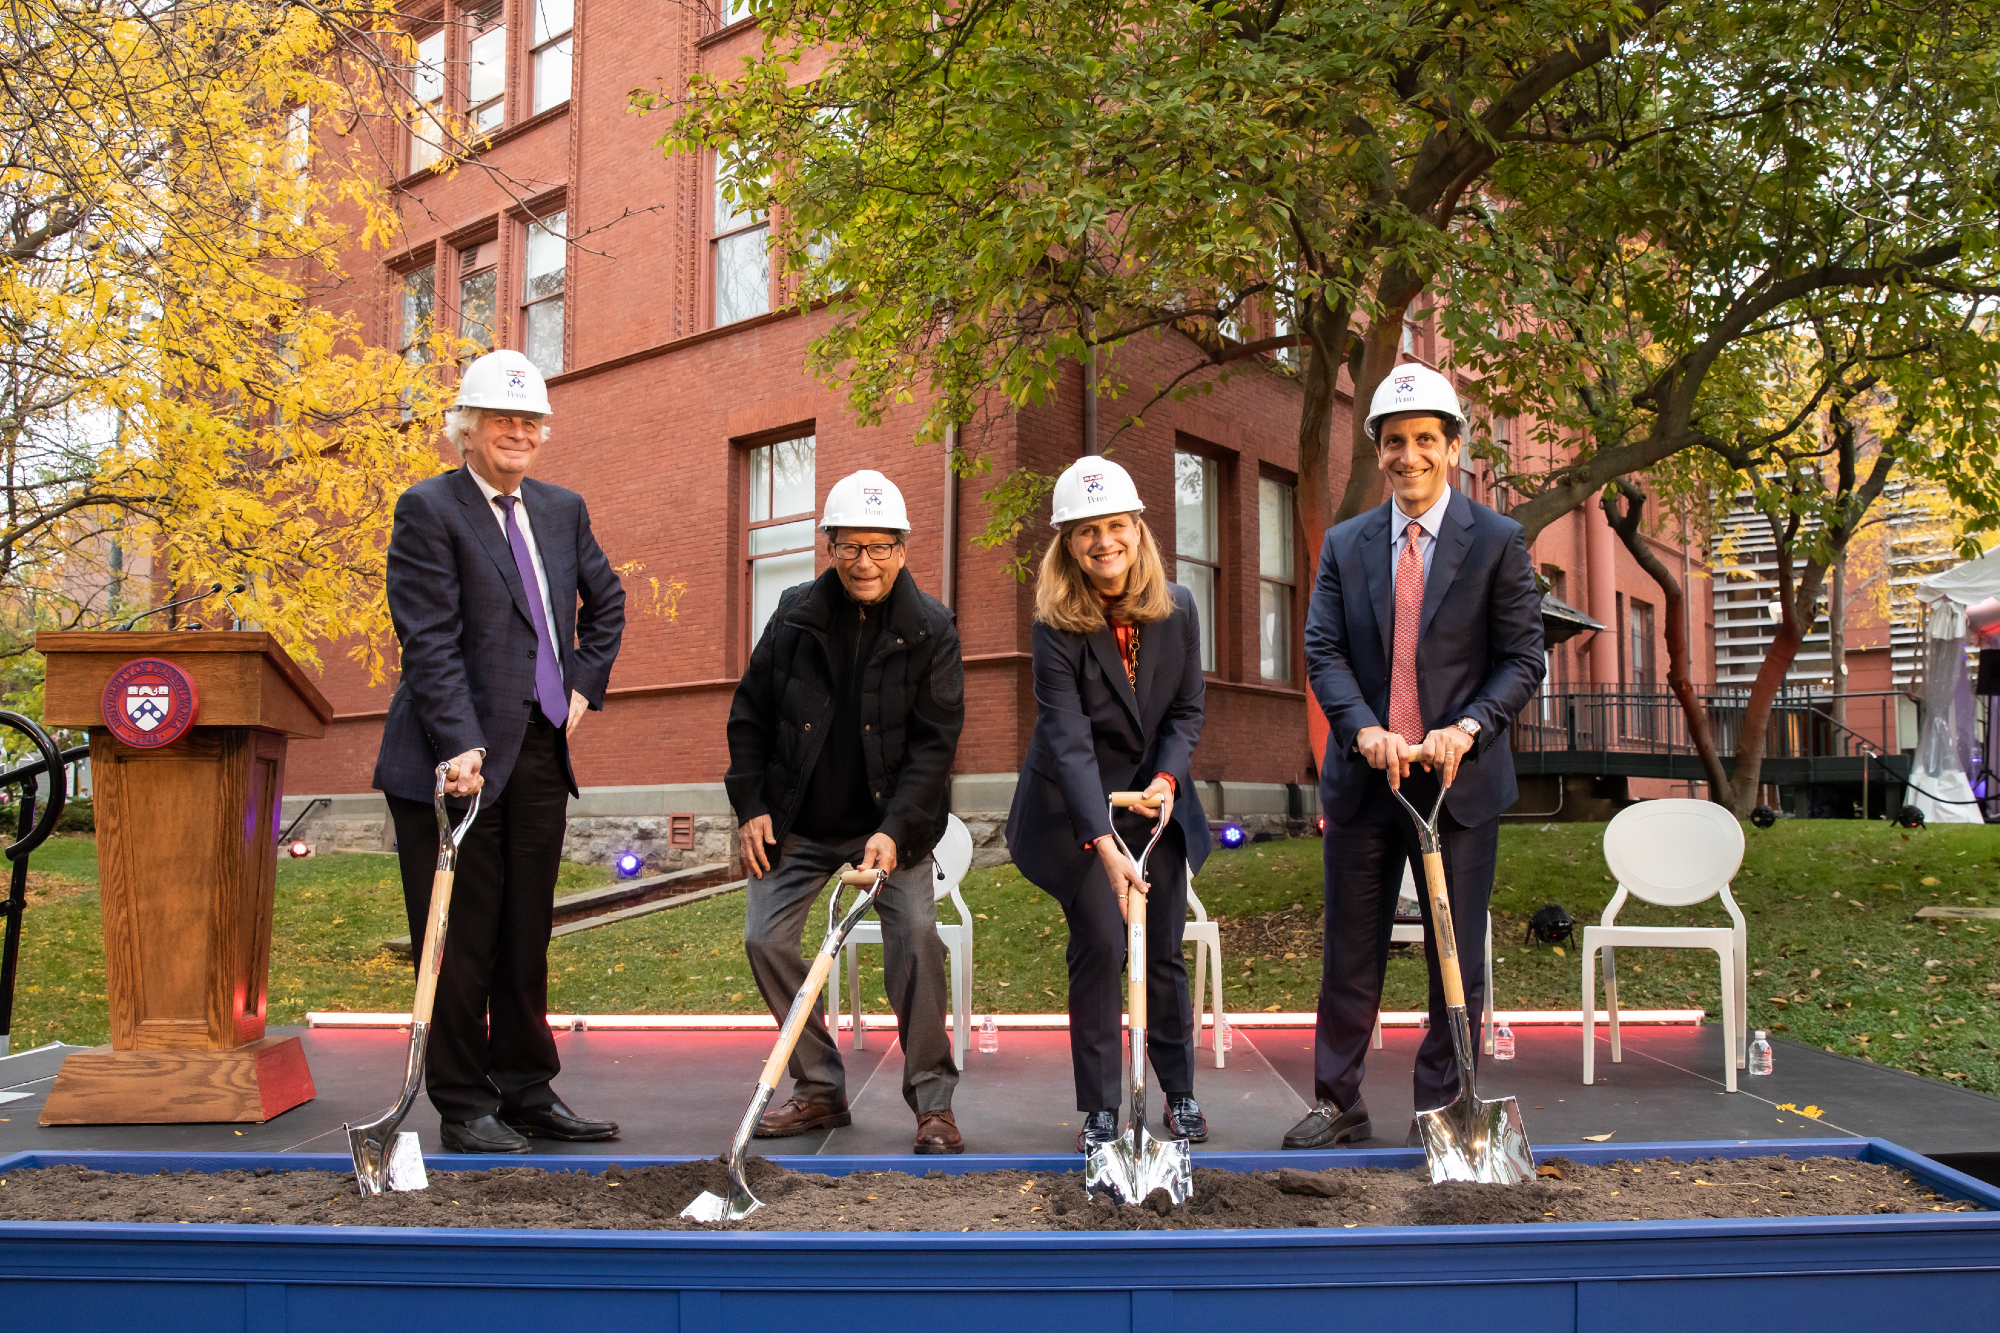 Four people wearing white hardhats are putting shovels into a trough of dirt in front of a stage, which is outside in front of a brick building. 